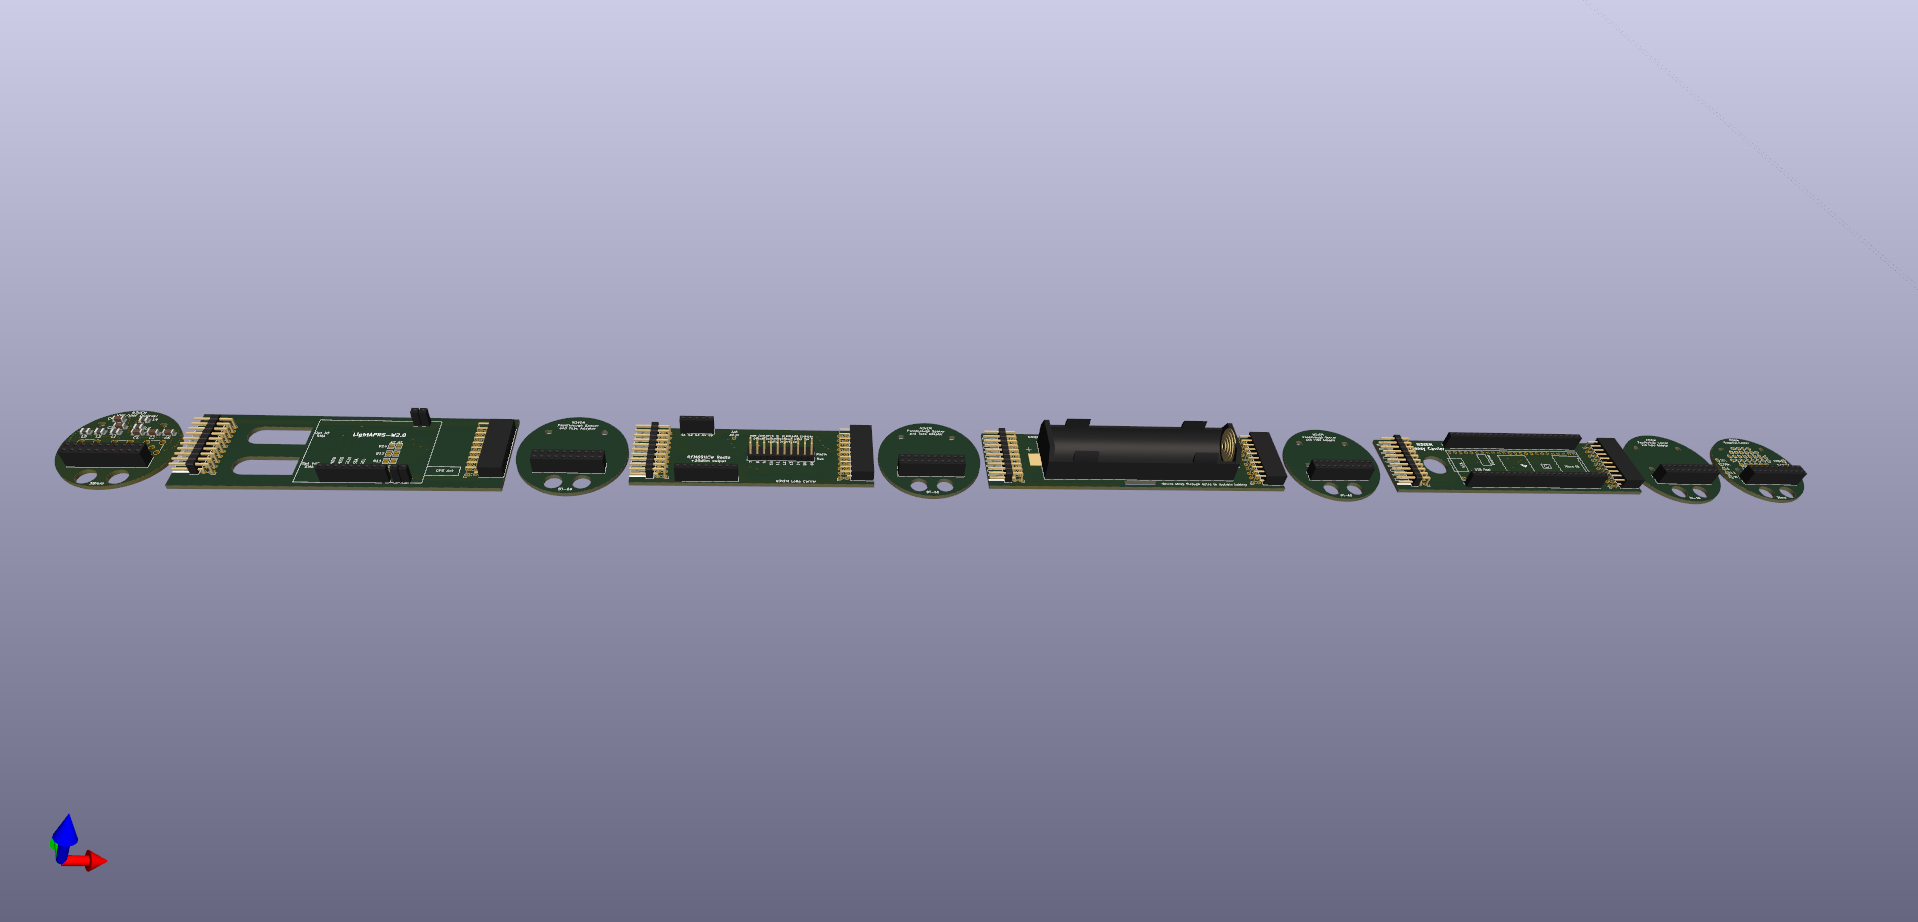 3D rendering of a group of circuit boards